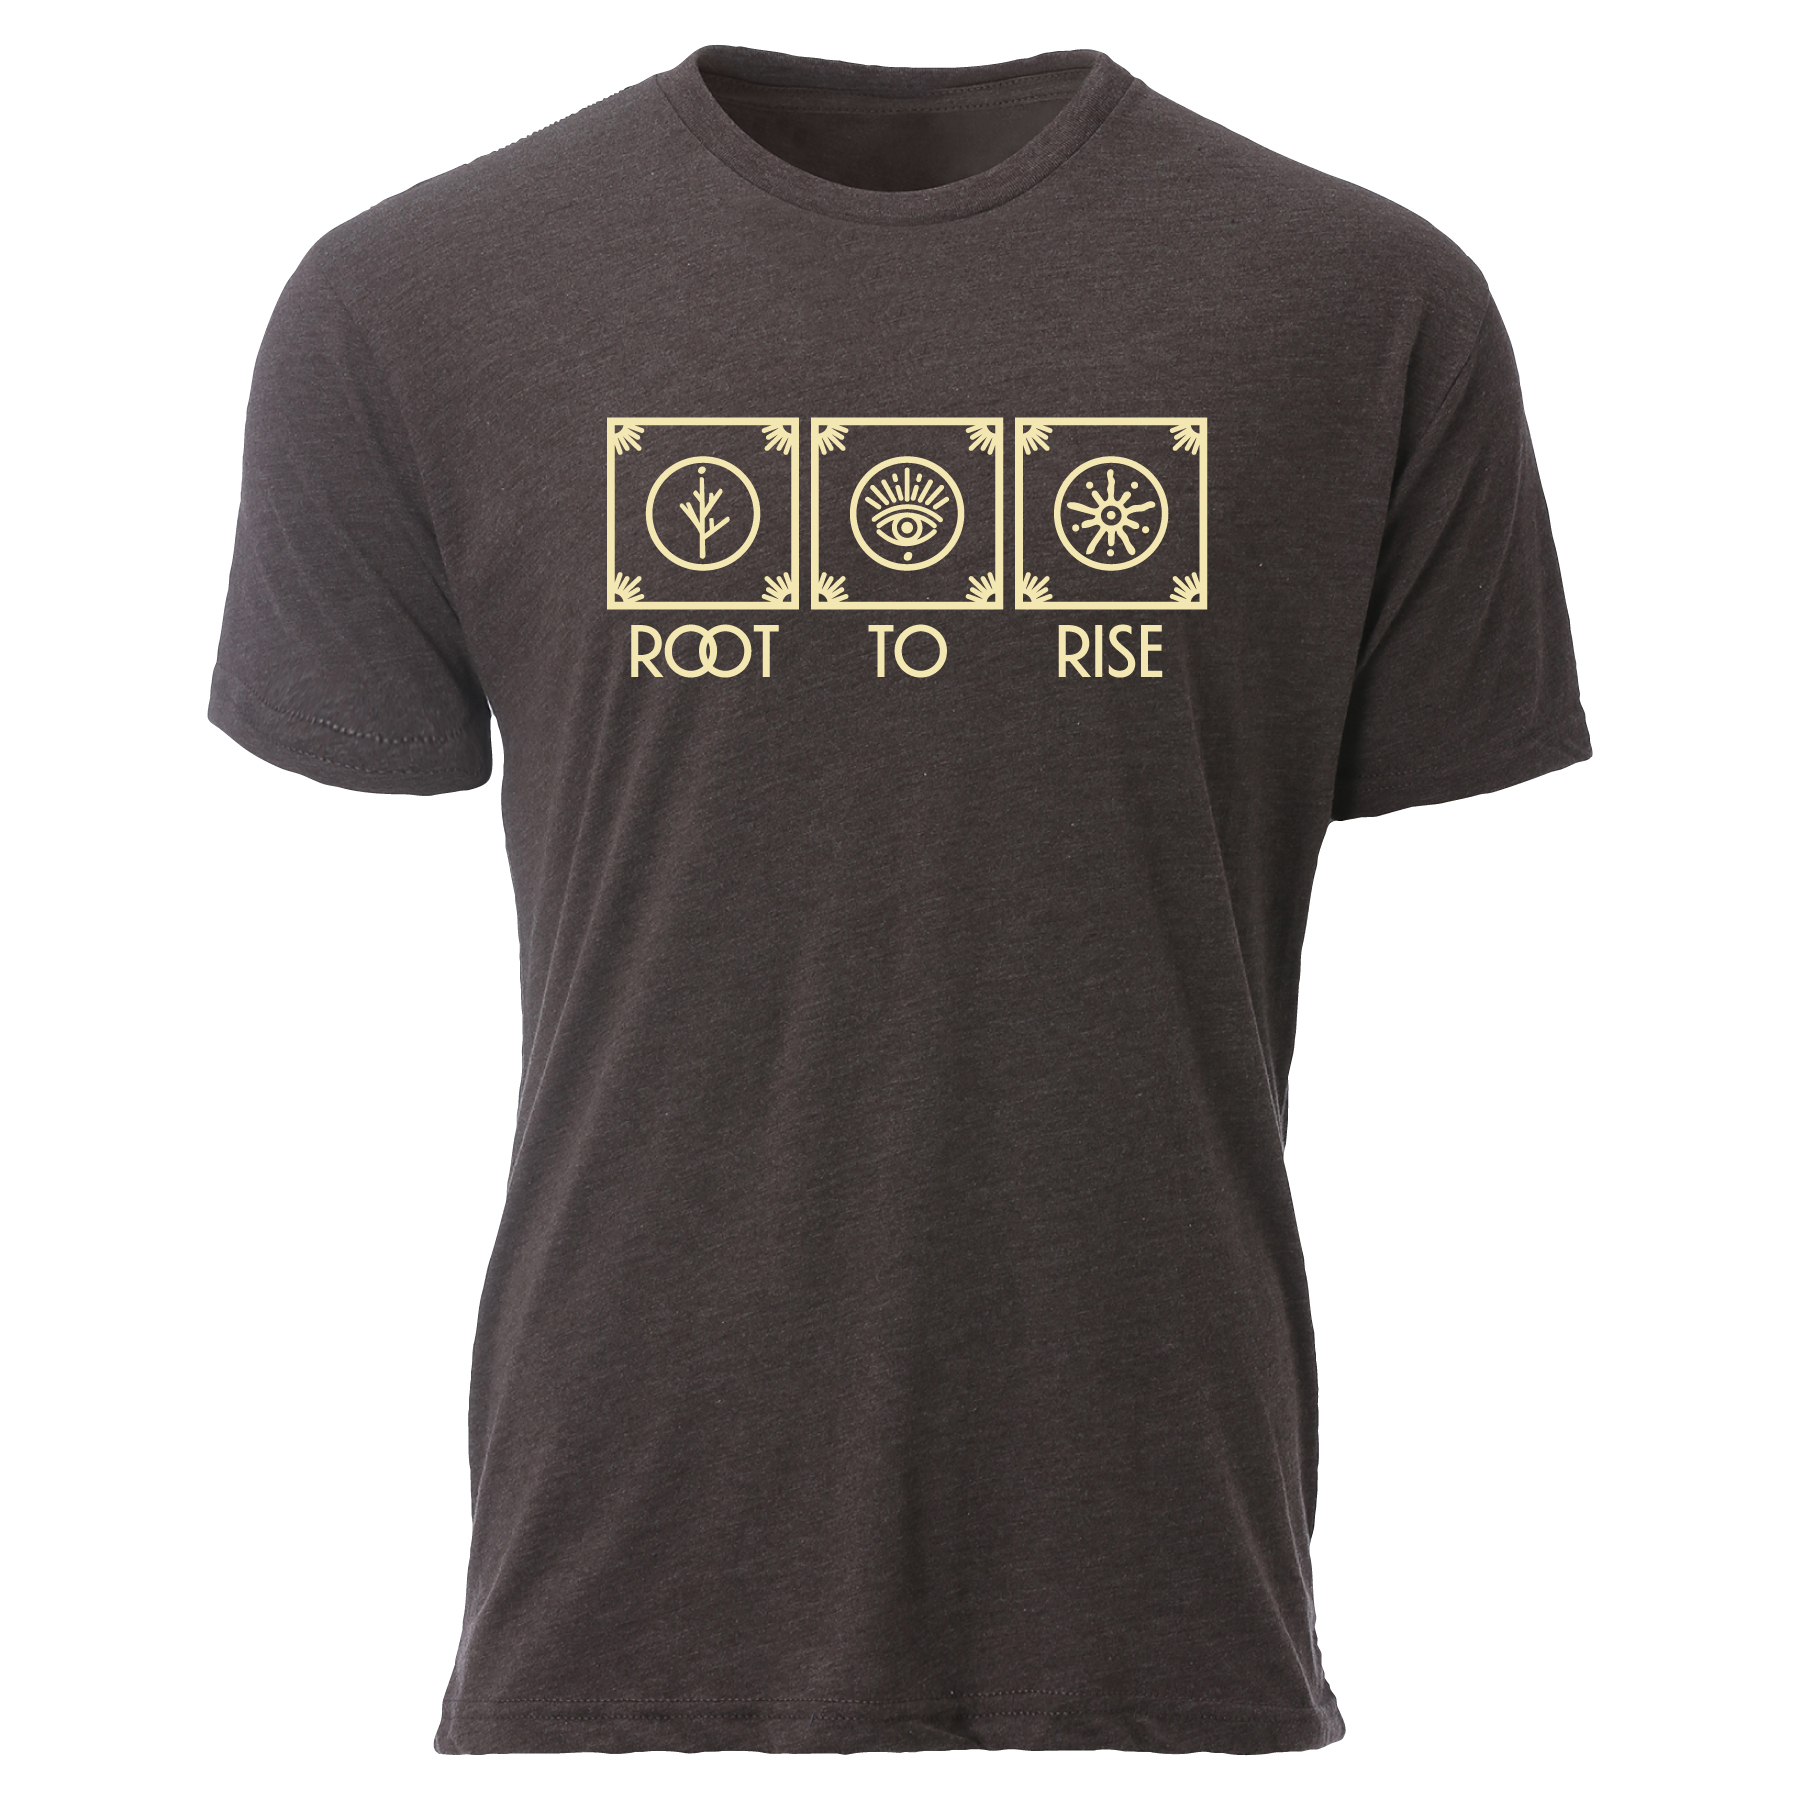 Root to Rise Yoga Denver T-shirt Unisex Brown